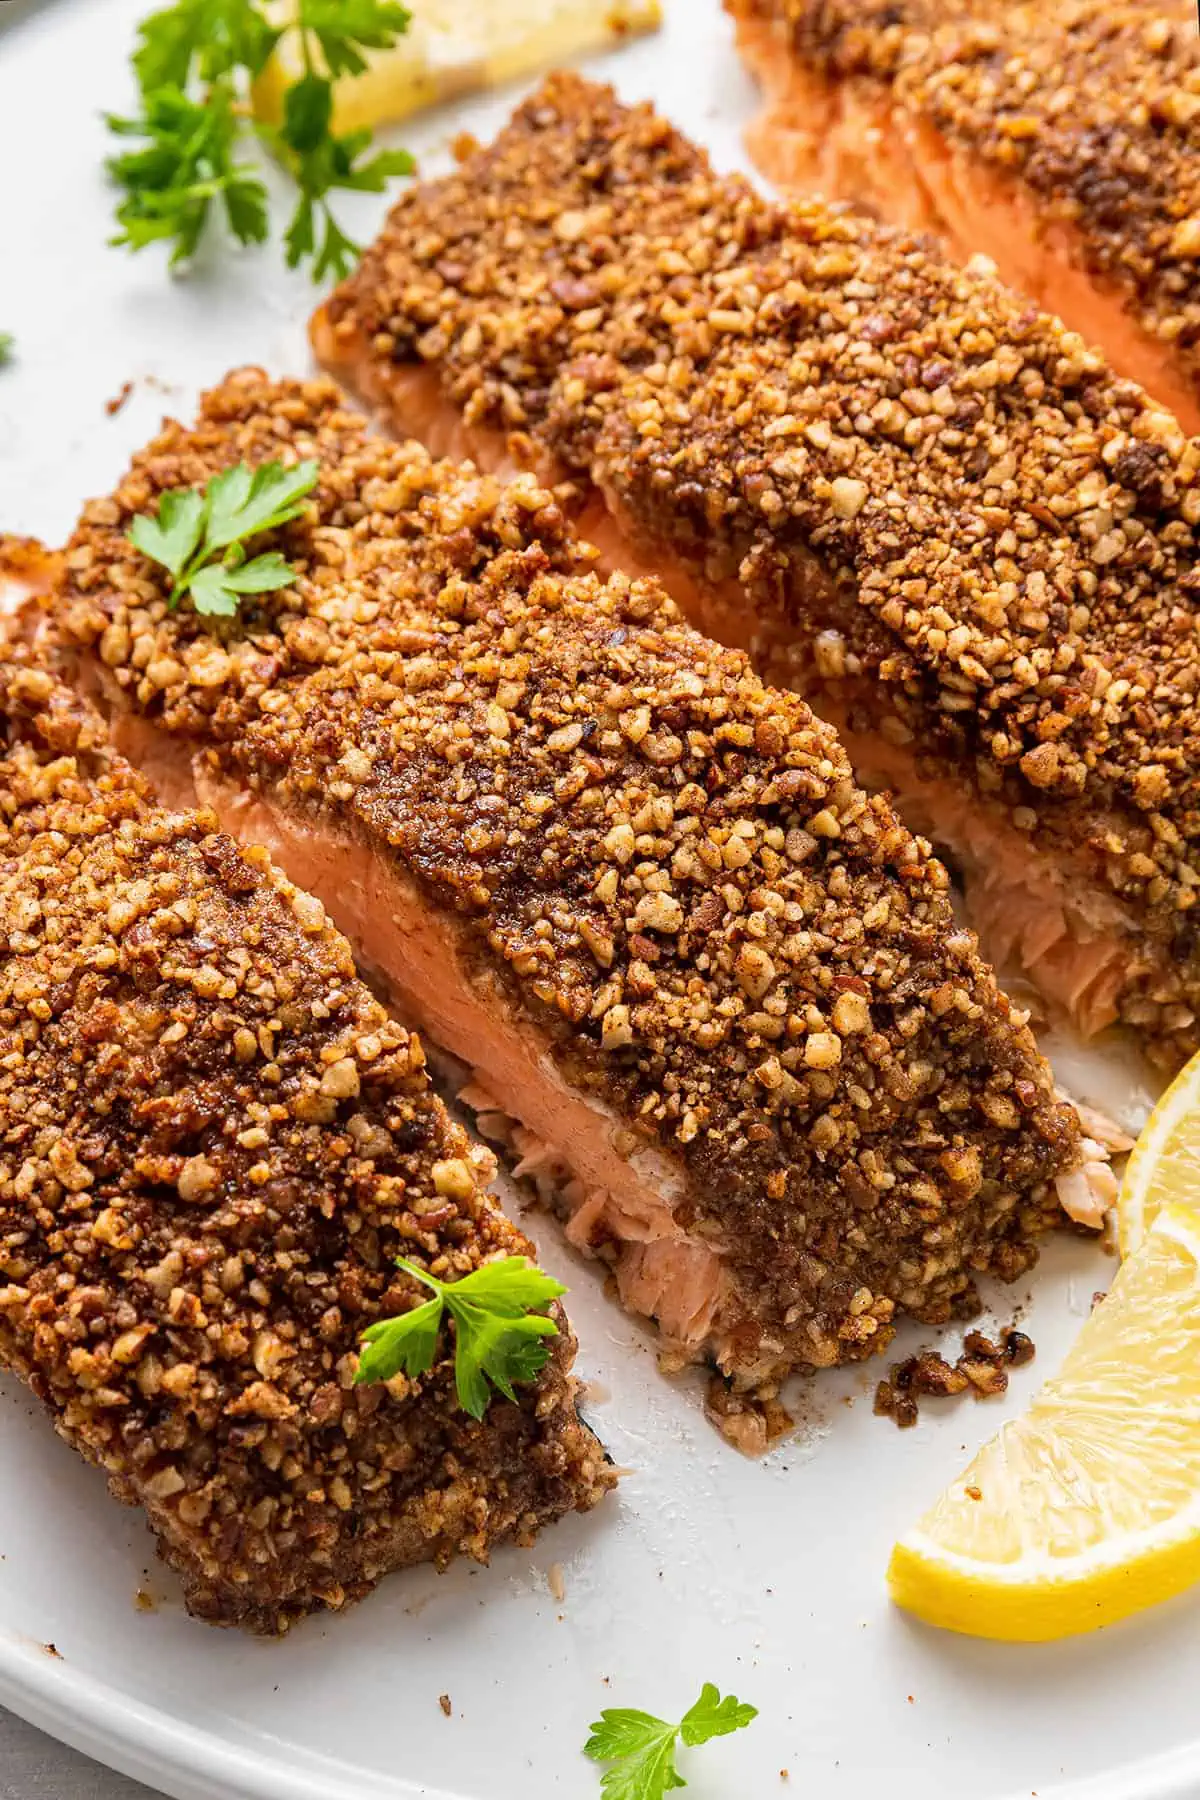 Cooked salmon fillets crusted in pecans